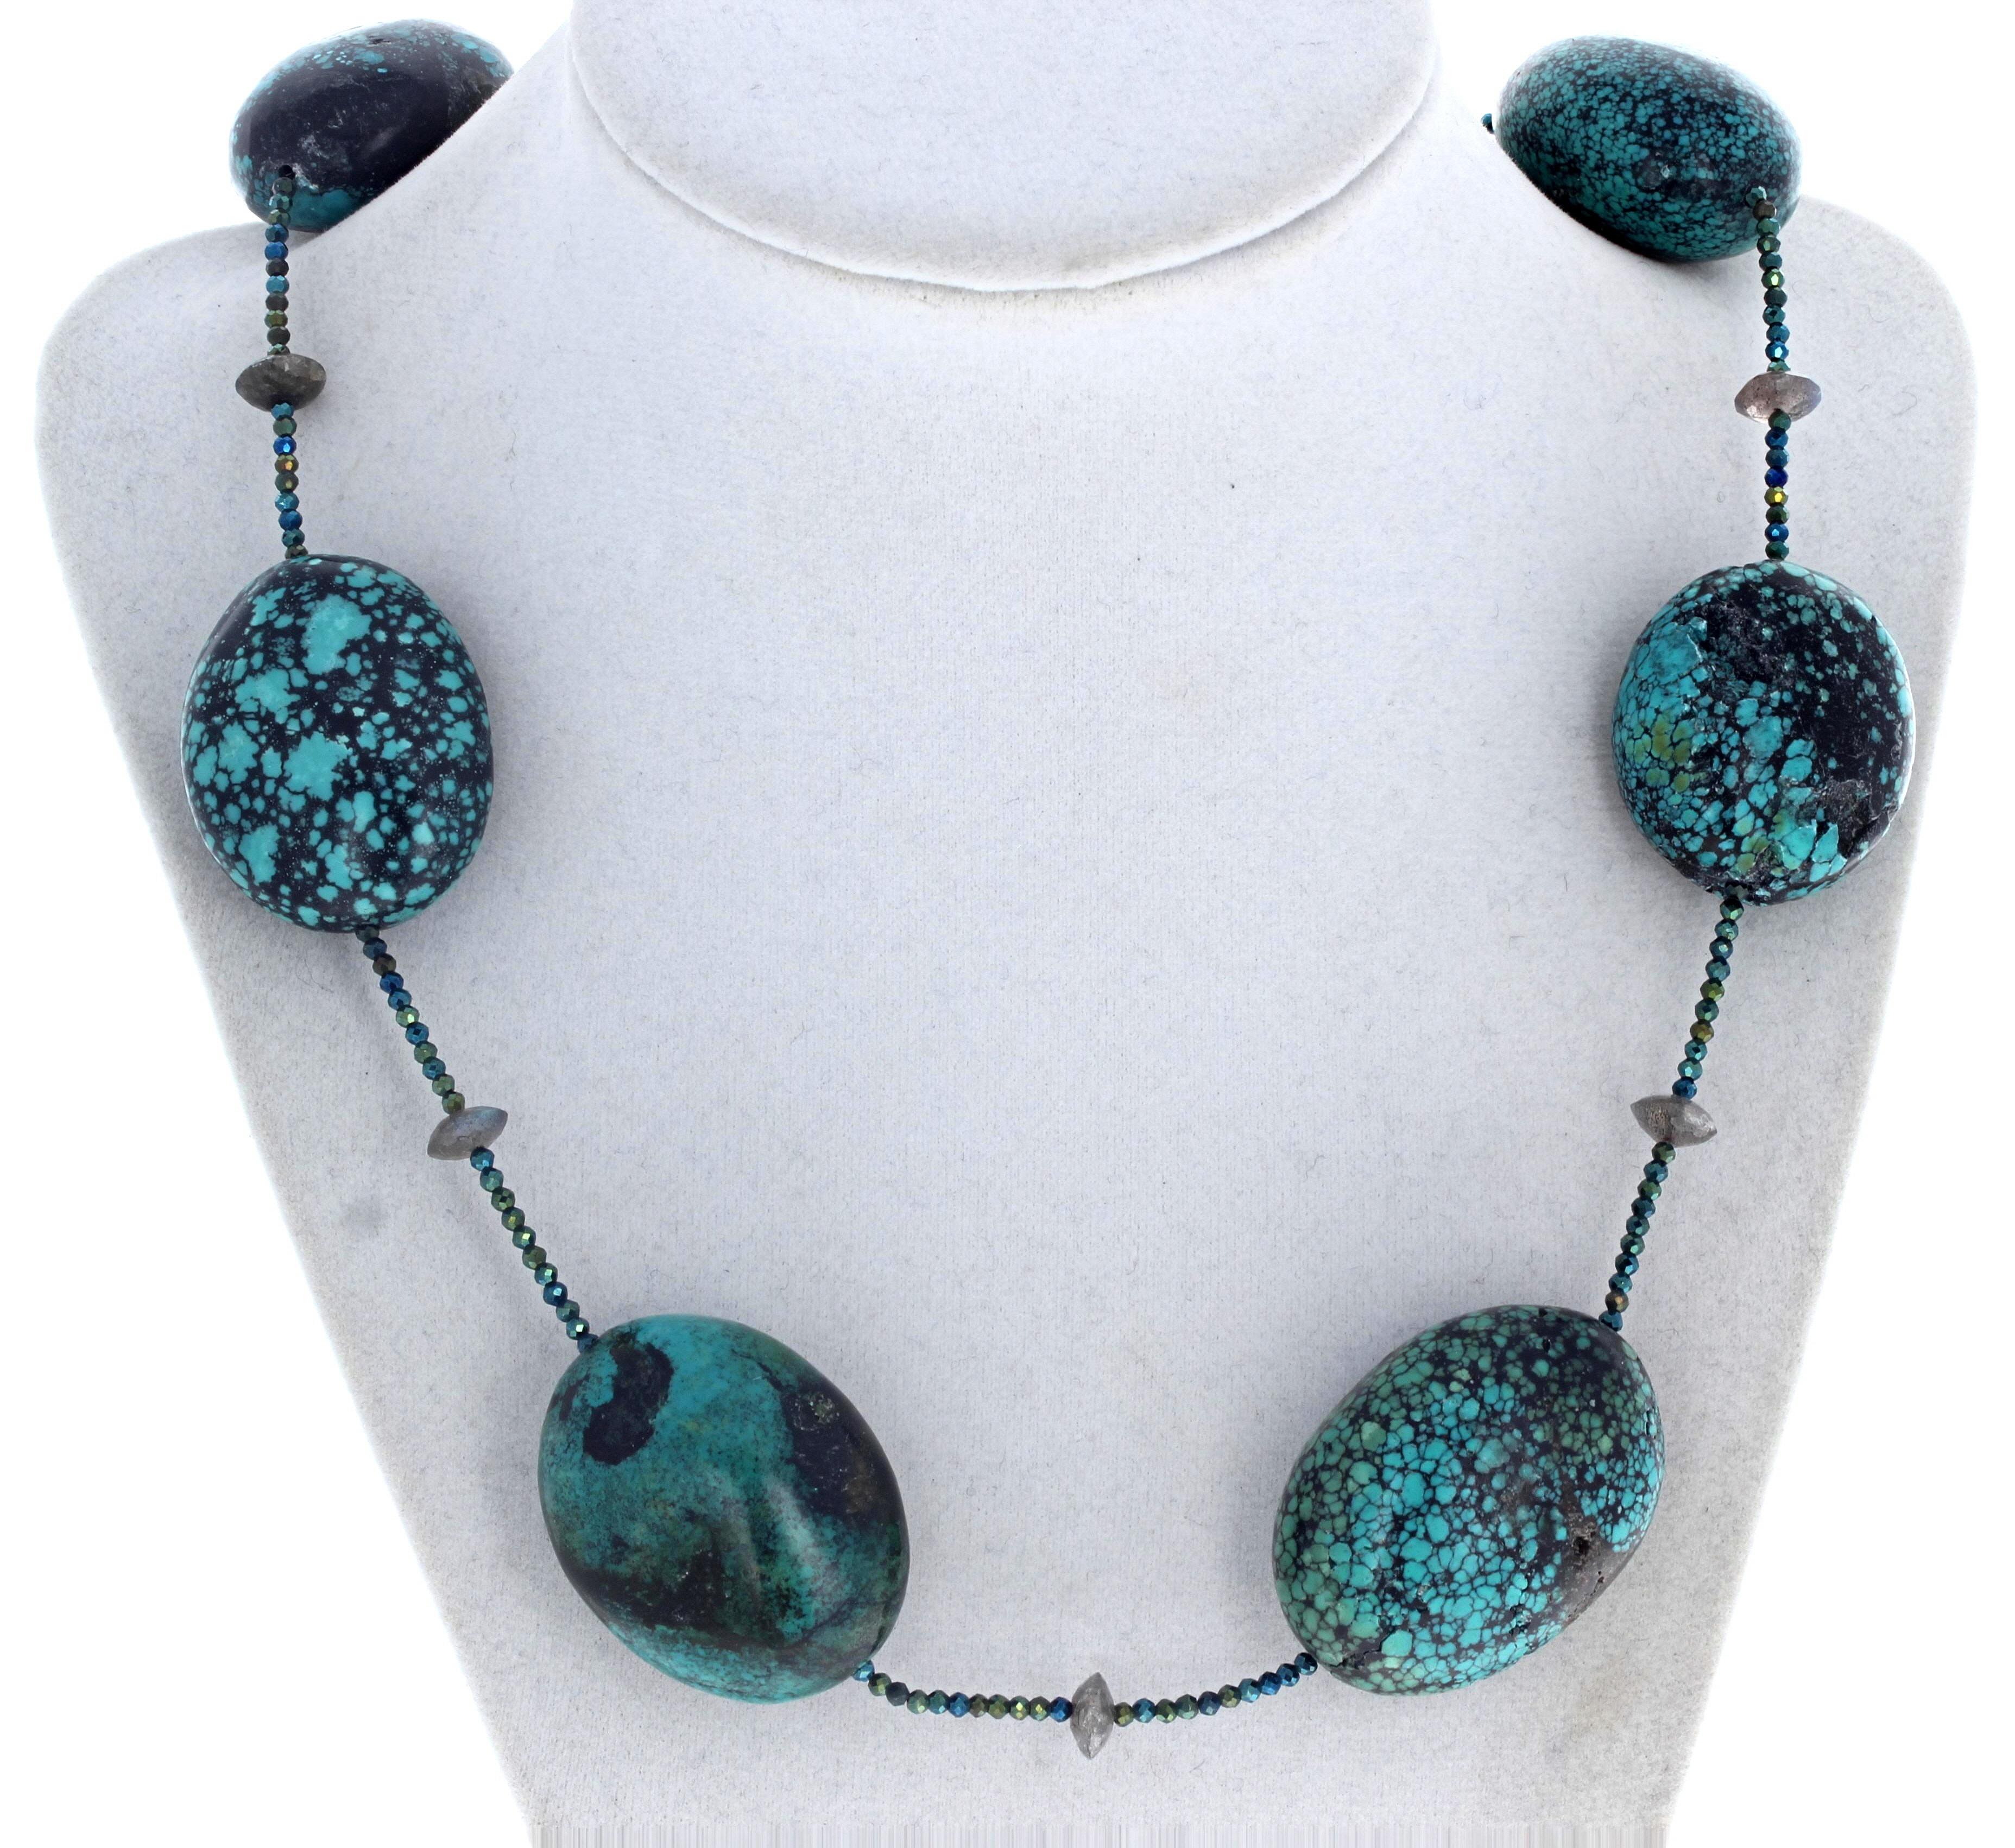 Contemporary AJD Absolutely Elegant Natural Turquoise & Sparkling Labradorites Necklace